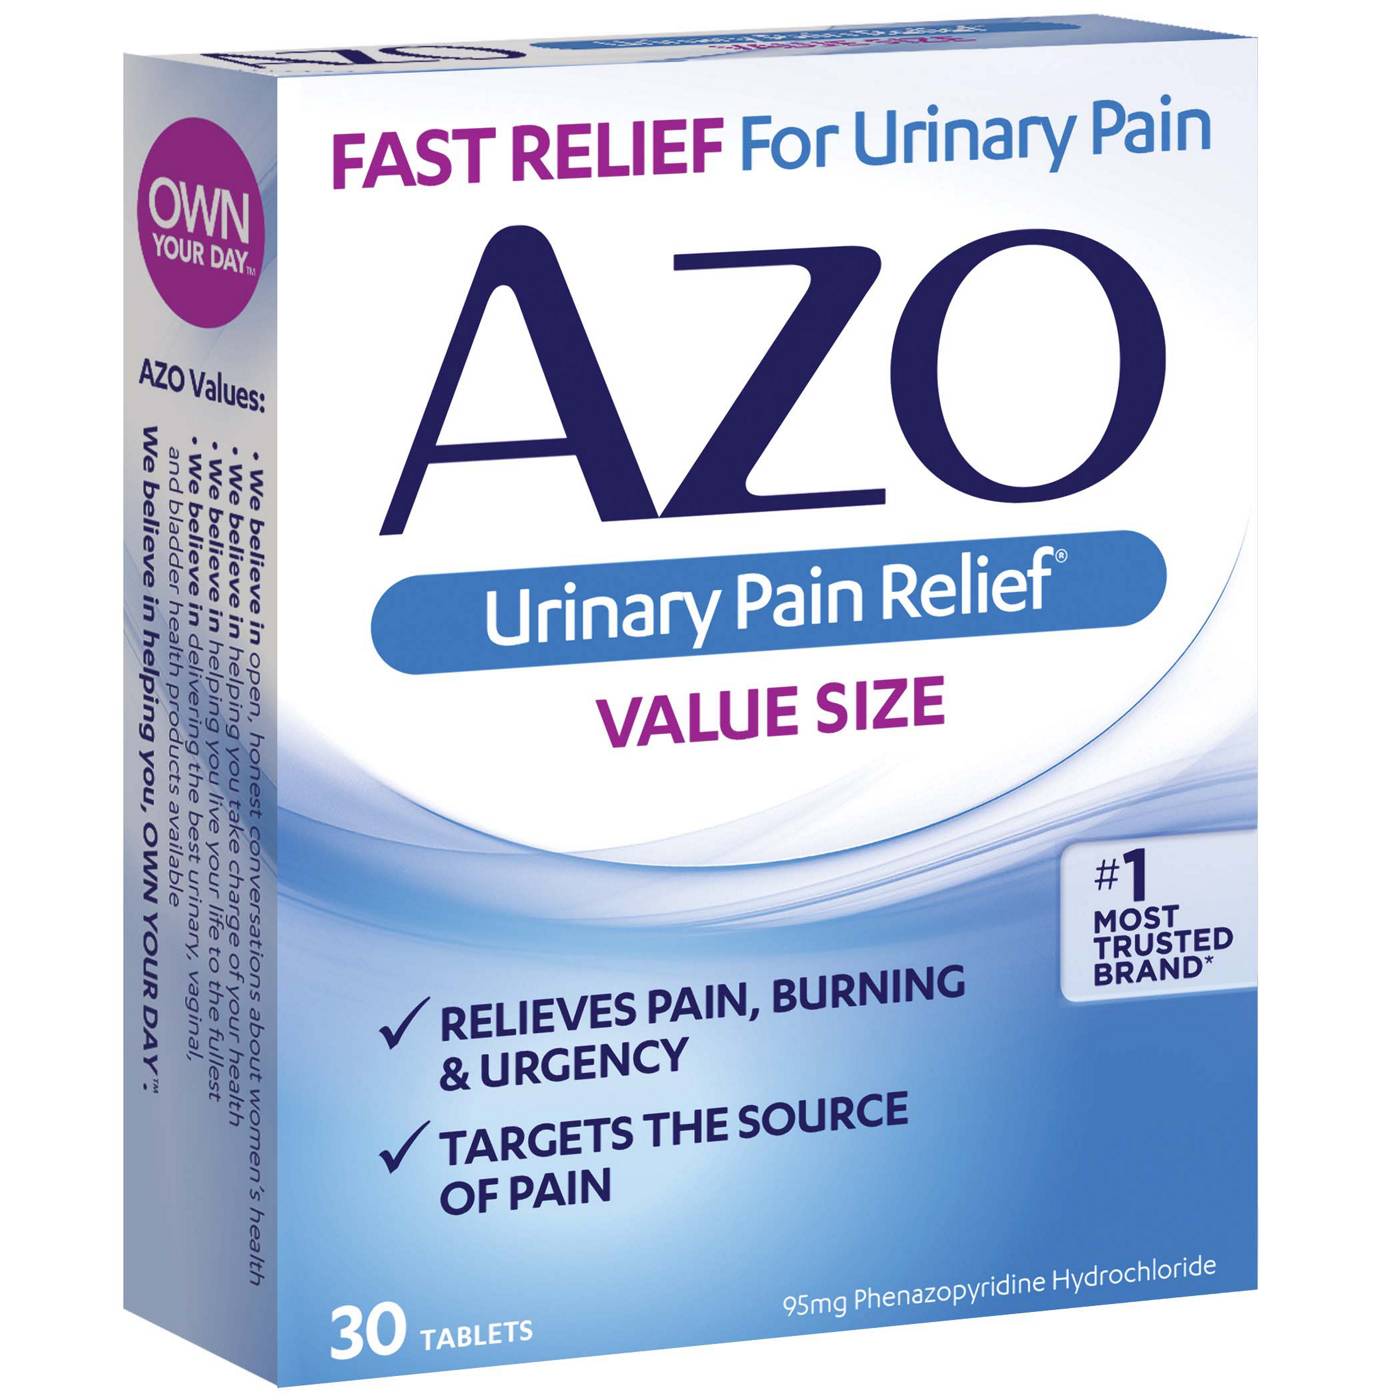 Azo Urinary Pain Relief; image 2 of 4